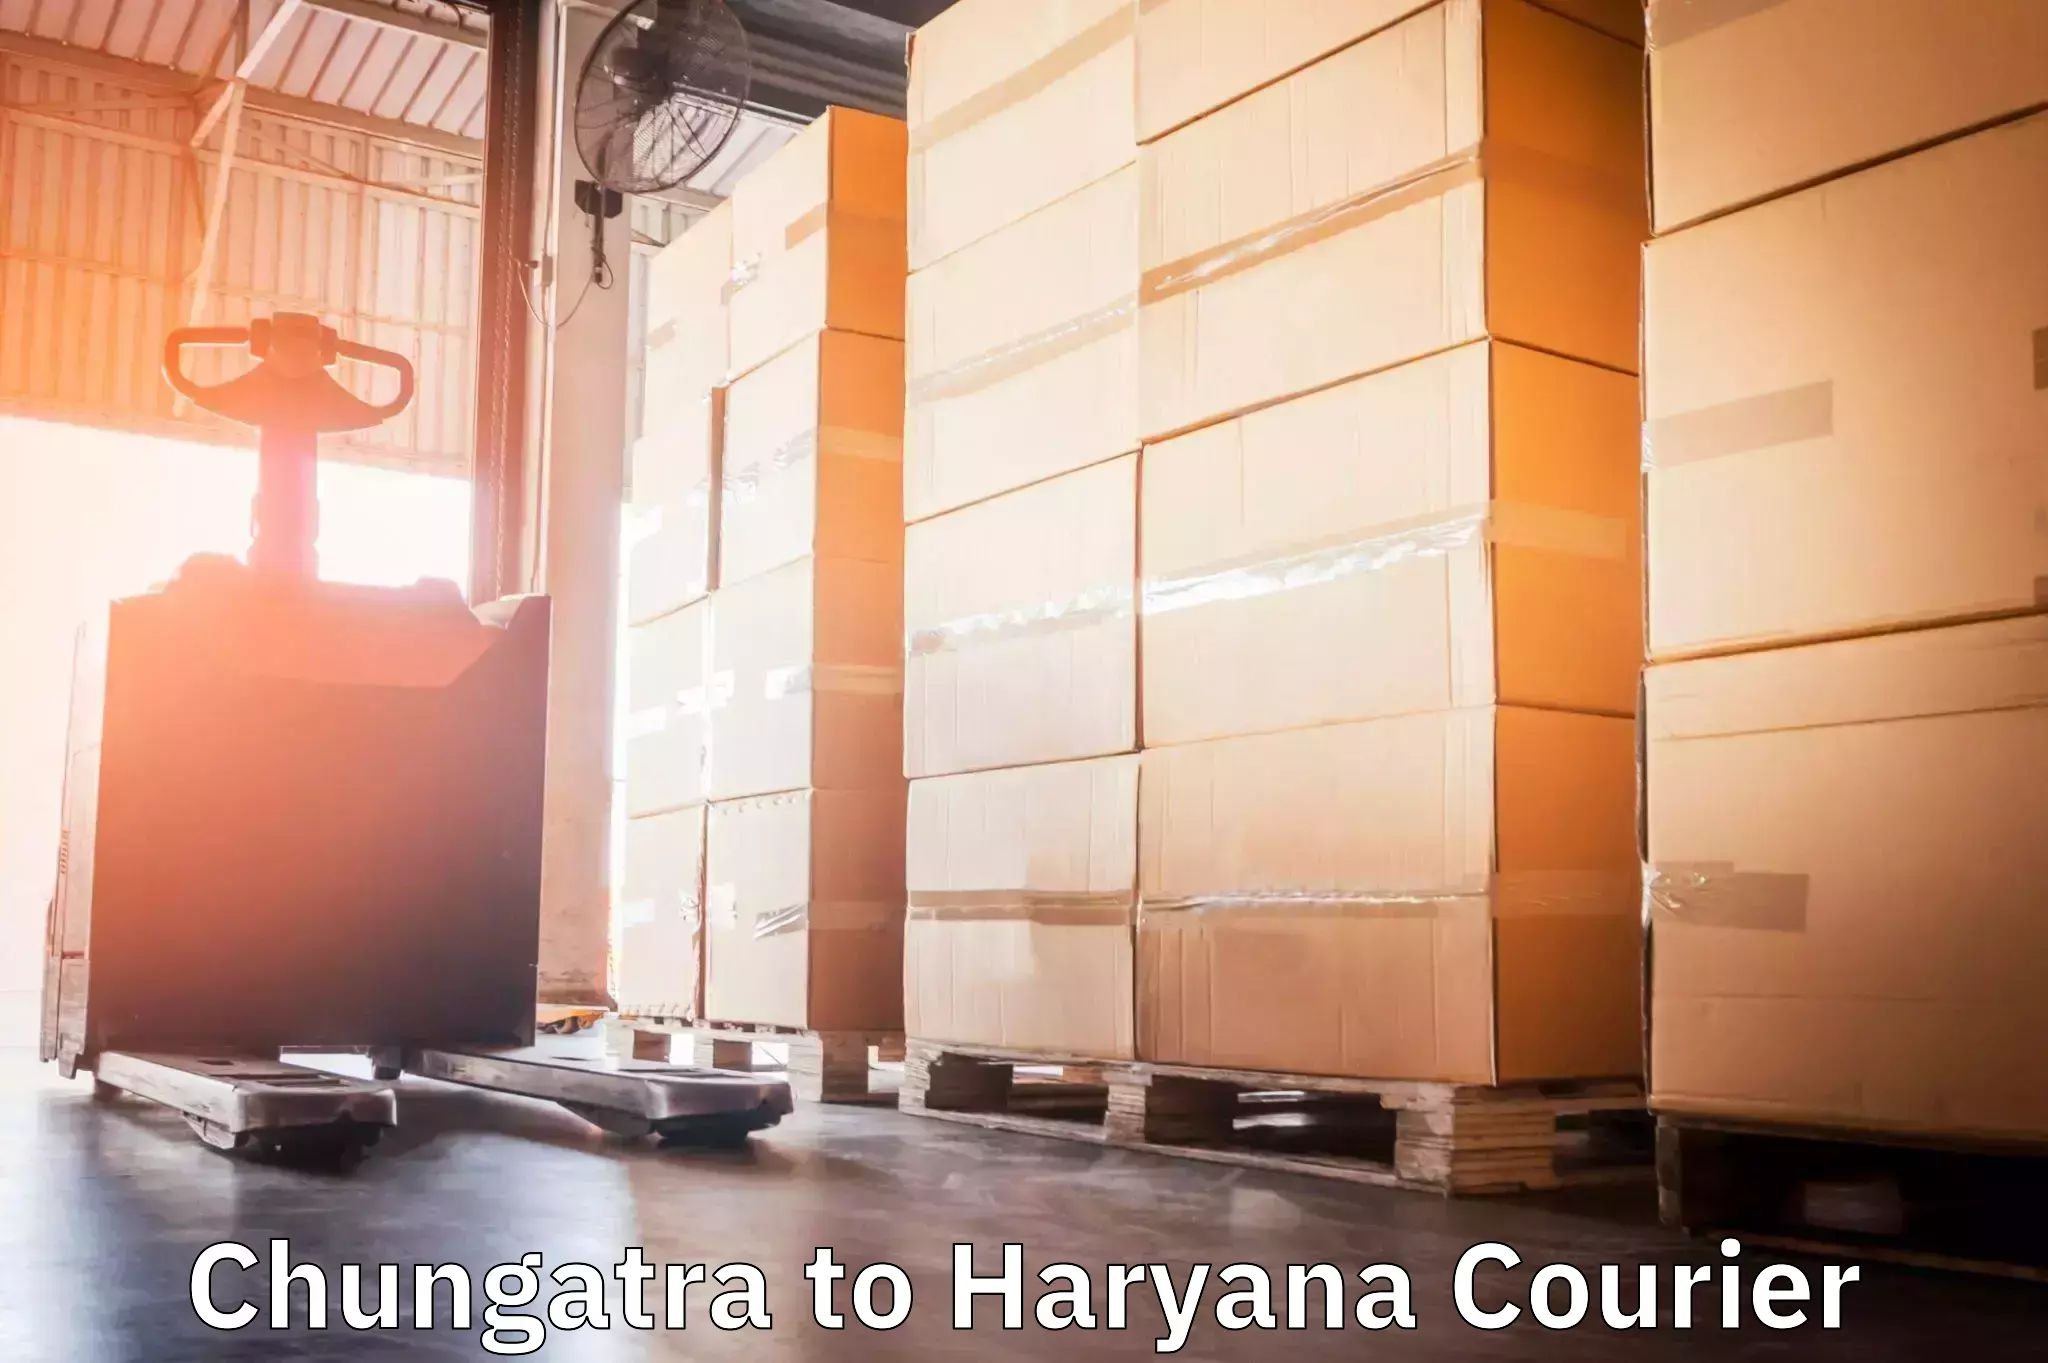 Parcel service for businesses Chungatra to Haryana